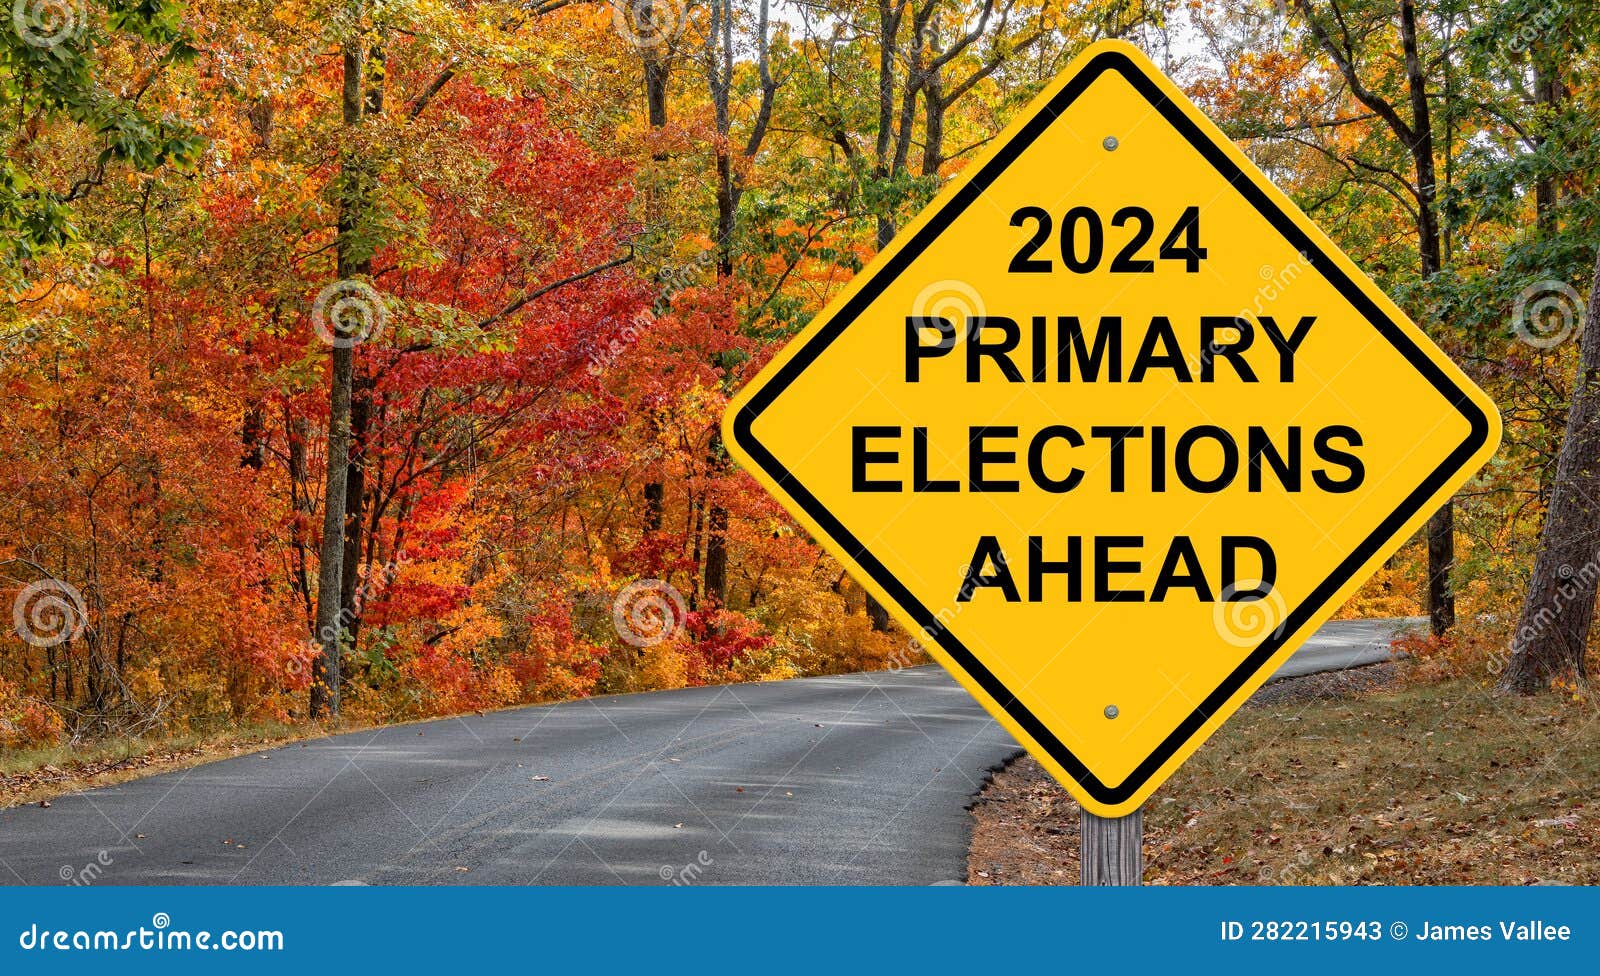 2024 primary elections ahead sign